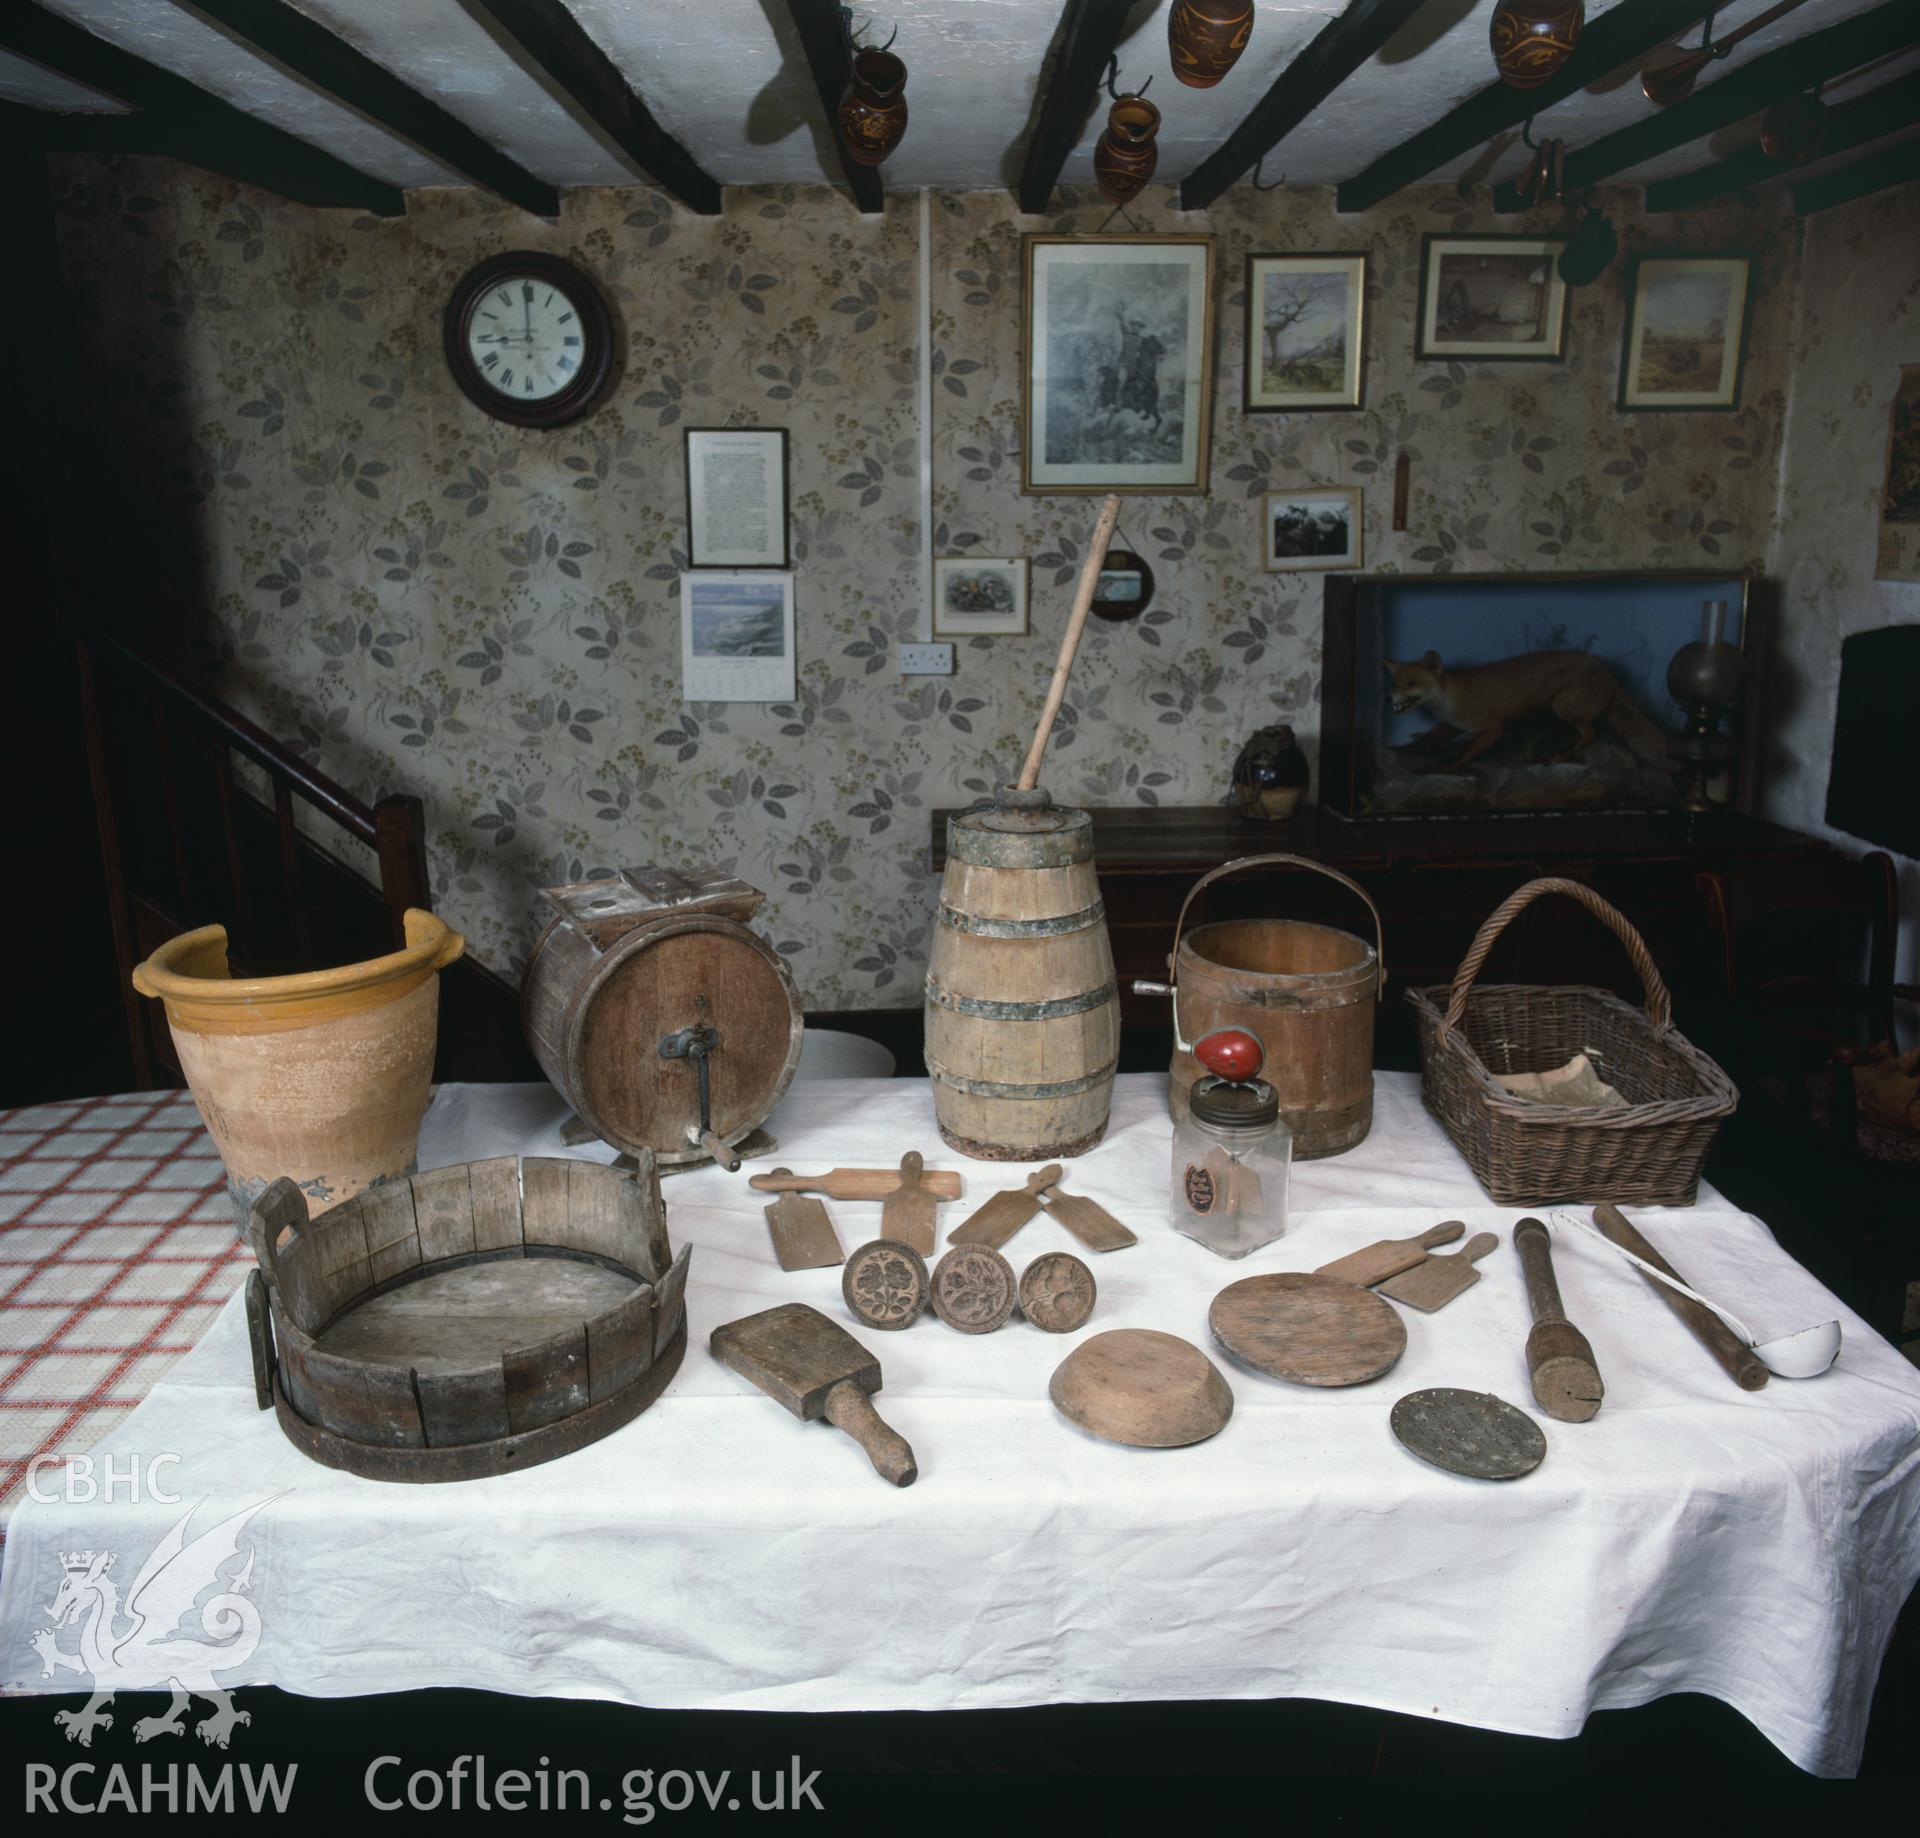 RCAHMW colour transparency showing a display of kitchen utensils on a table at Glan Ithon Farmhouse, taken by RCAHMW, undated.